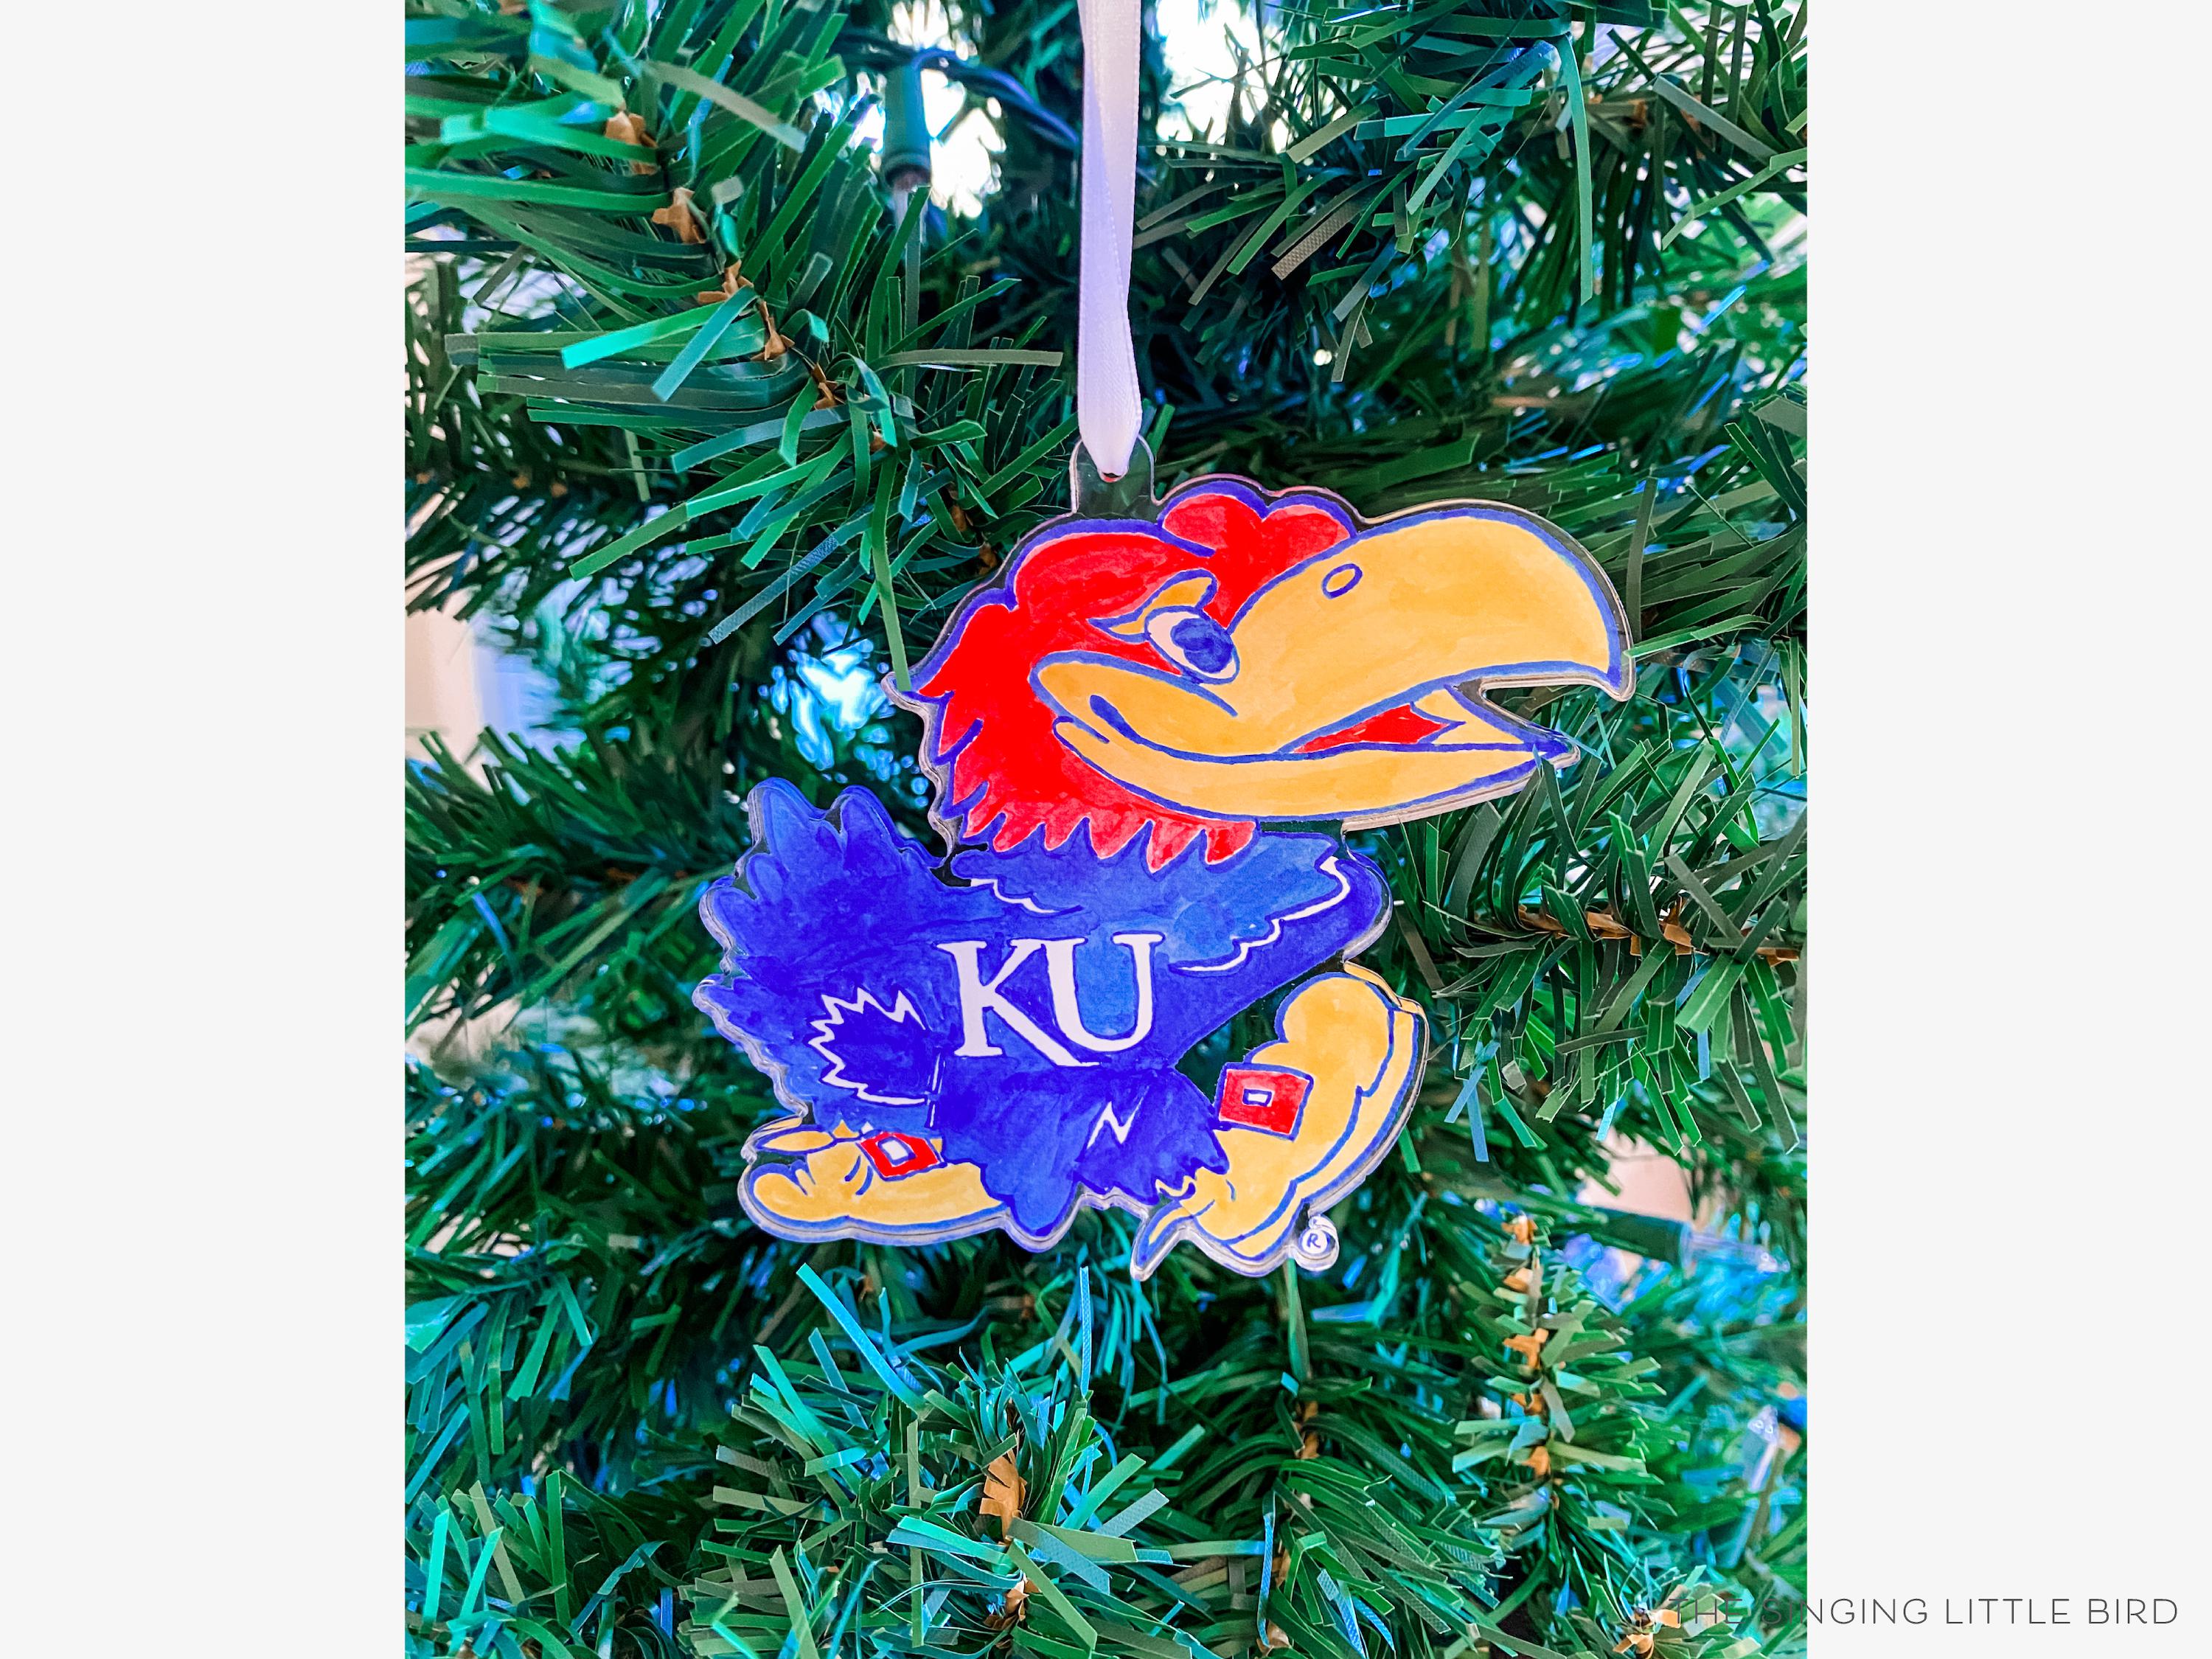 Kansas Jayhawk Acrylic Ornament [Officially Licensed]-These acrylic ornaments feature our hand-painted watercolor Kansas Jayhawk. They include a white silk ribbon and measure approximately 4" on its longest side, making a great addition to your Christmas tree or gift for the University of Kansas lover in your life.-The Singing Little Bird